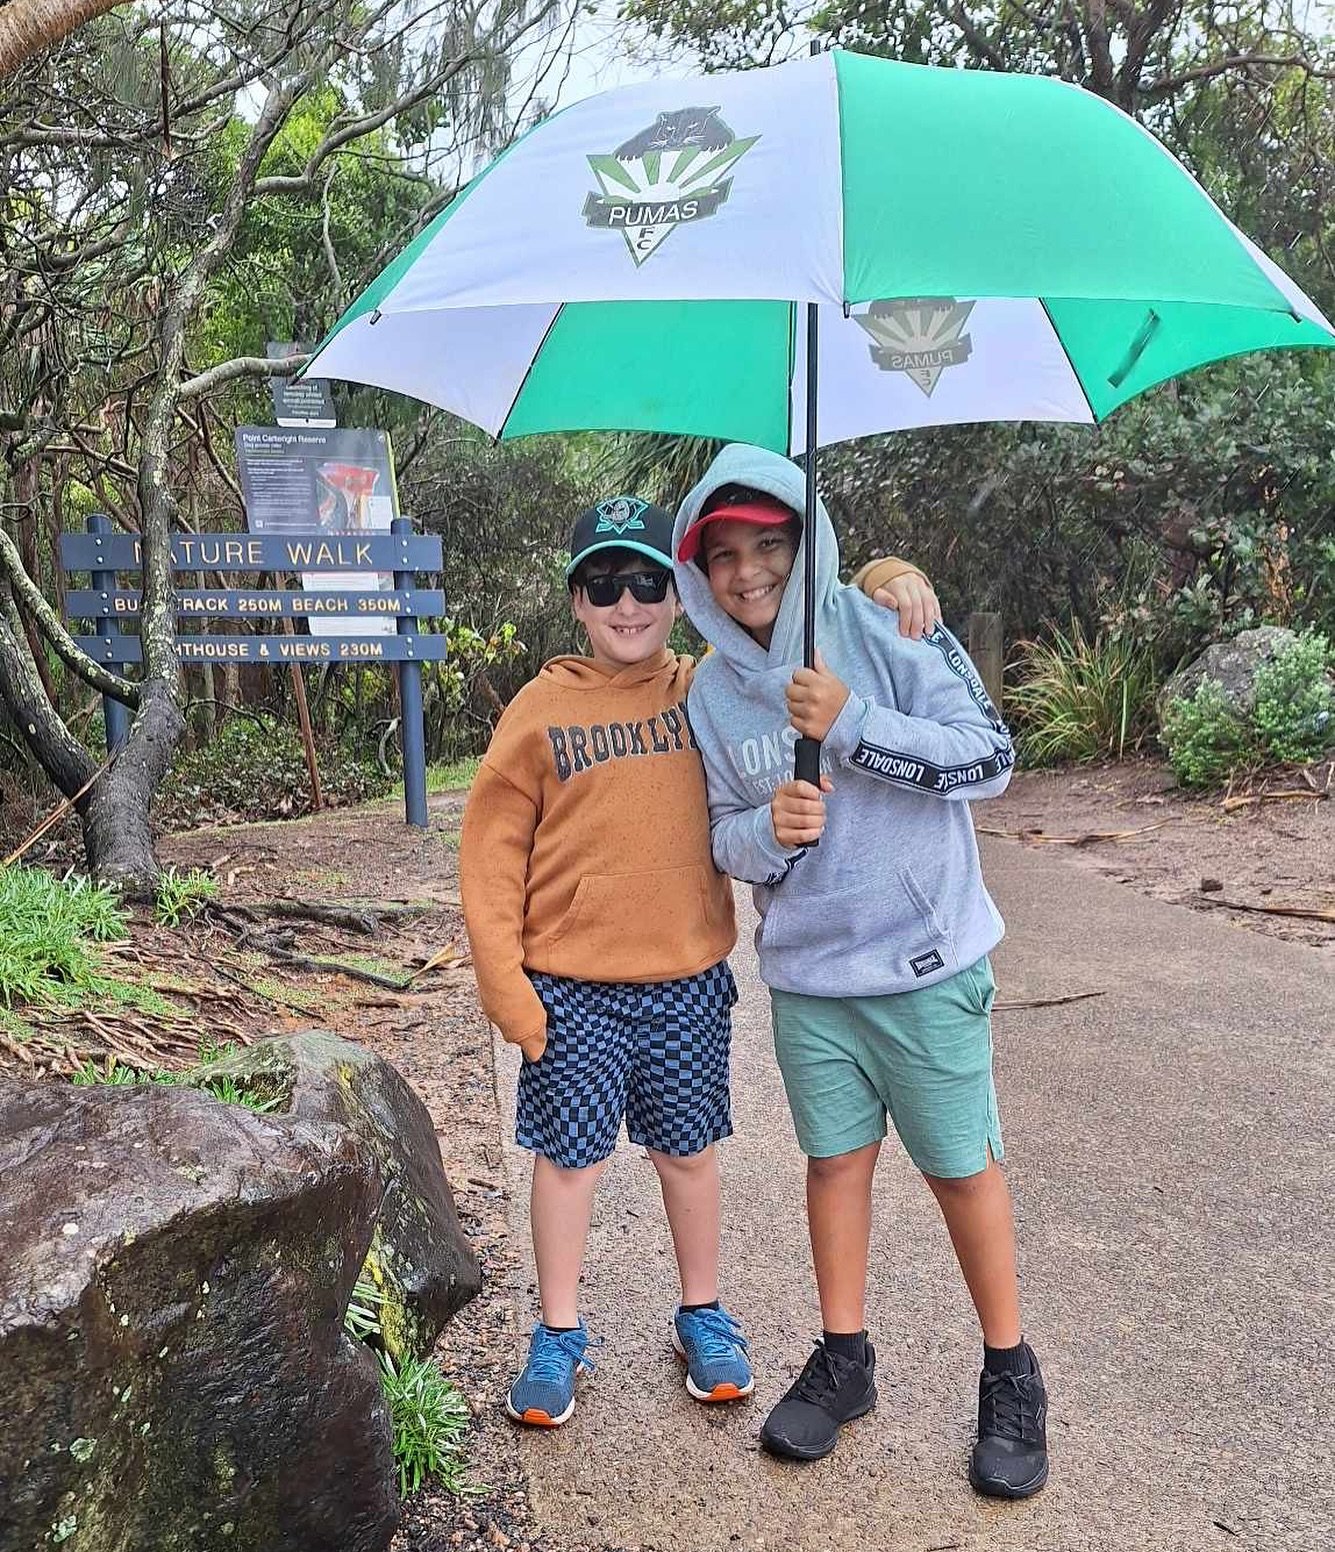 ☔️Don&rsquo;t get caught in the rain🌧️

Like Liam and George, who on a recent trip to Queensland, were lucky to have their reliable Hills Pumas umbrella to keep them dry and back enjoying their day. 

Swing by the shed, at training to purchase one o